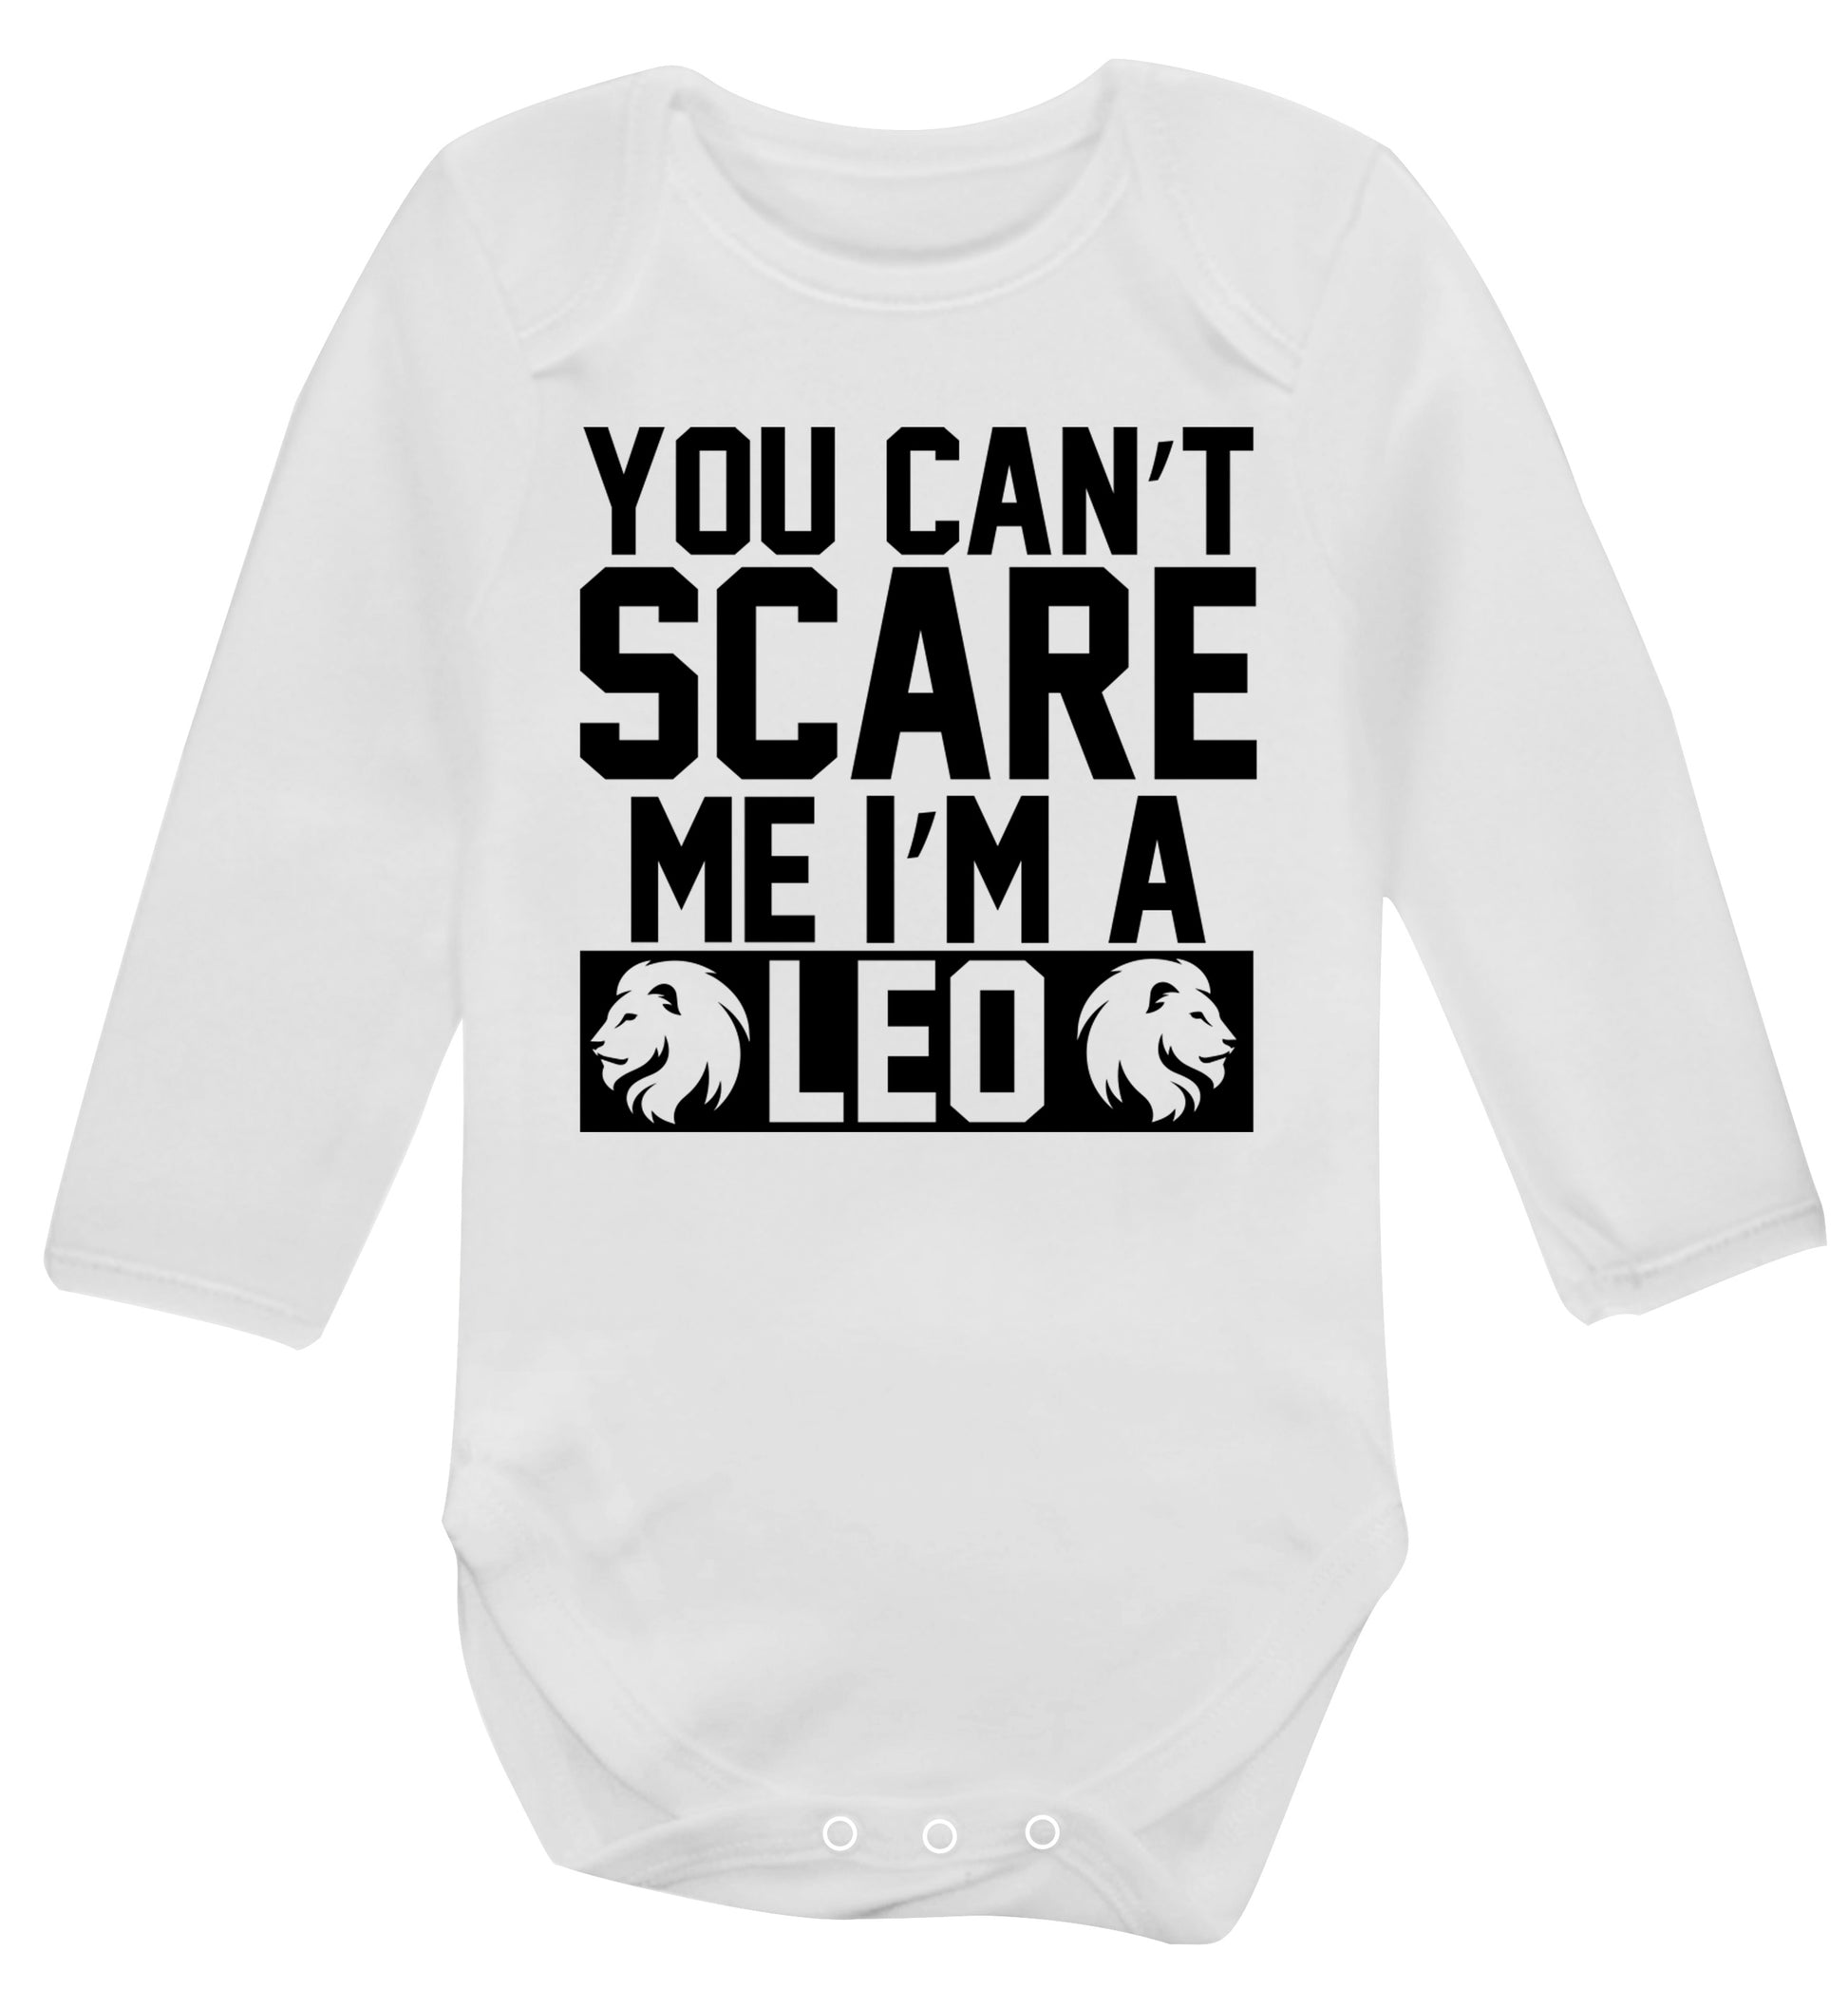 You can't scare me I'm a leo Baby Vest long sleeved white 6-12 months